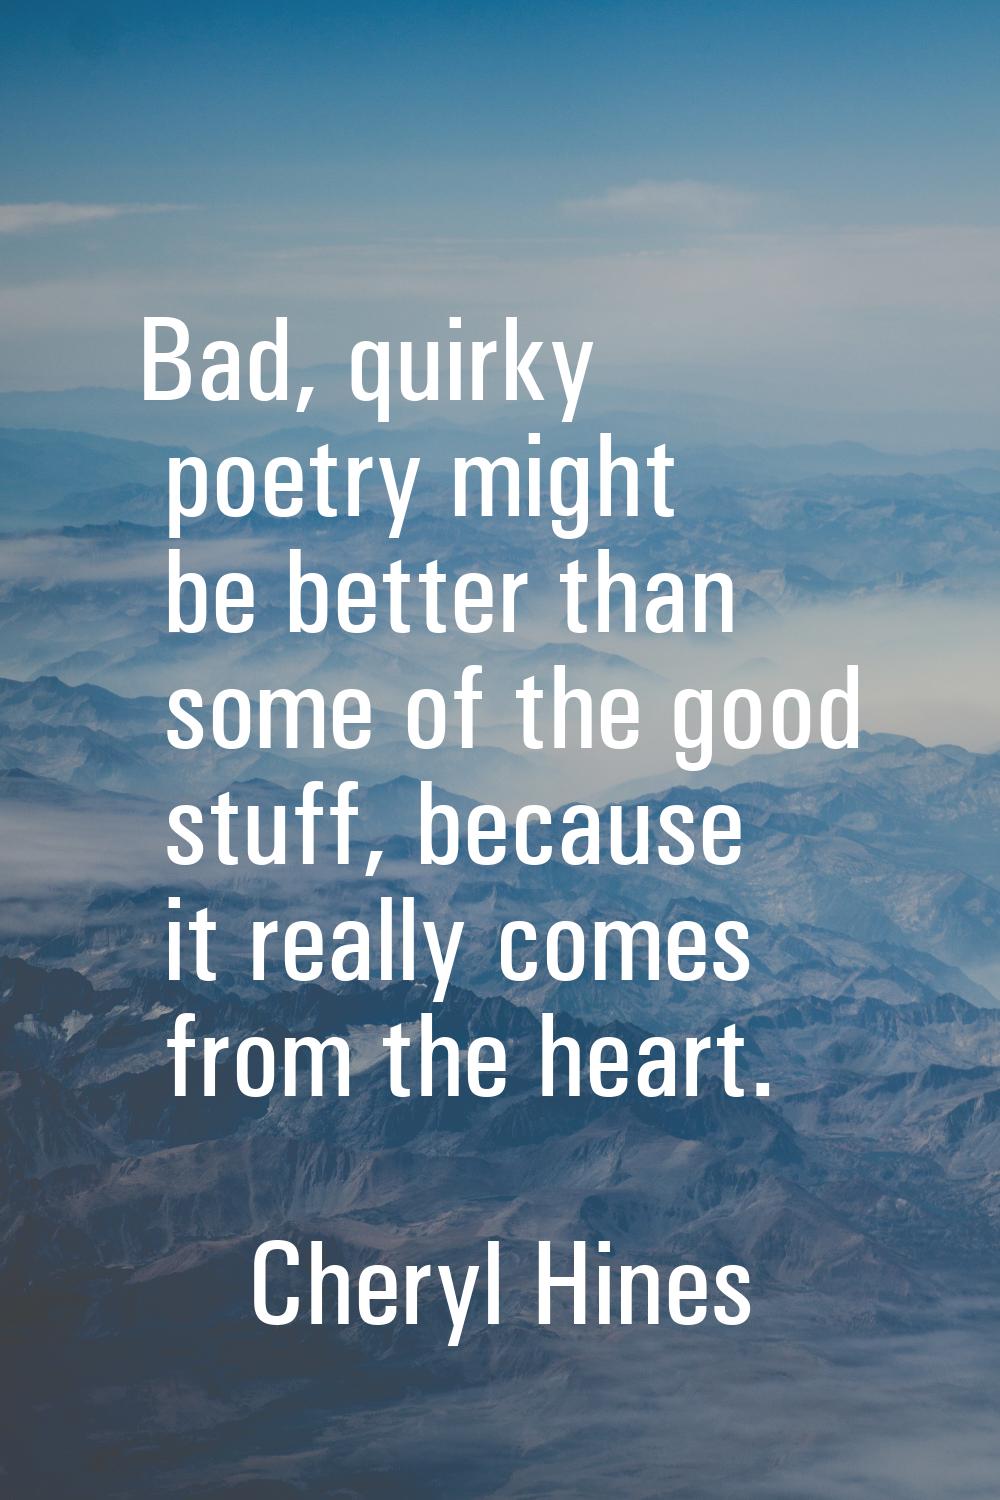 Bad, quirky poetry might be better than some of the good stuff, because it really comes from the he